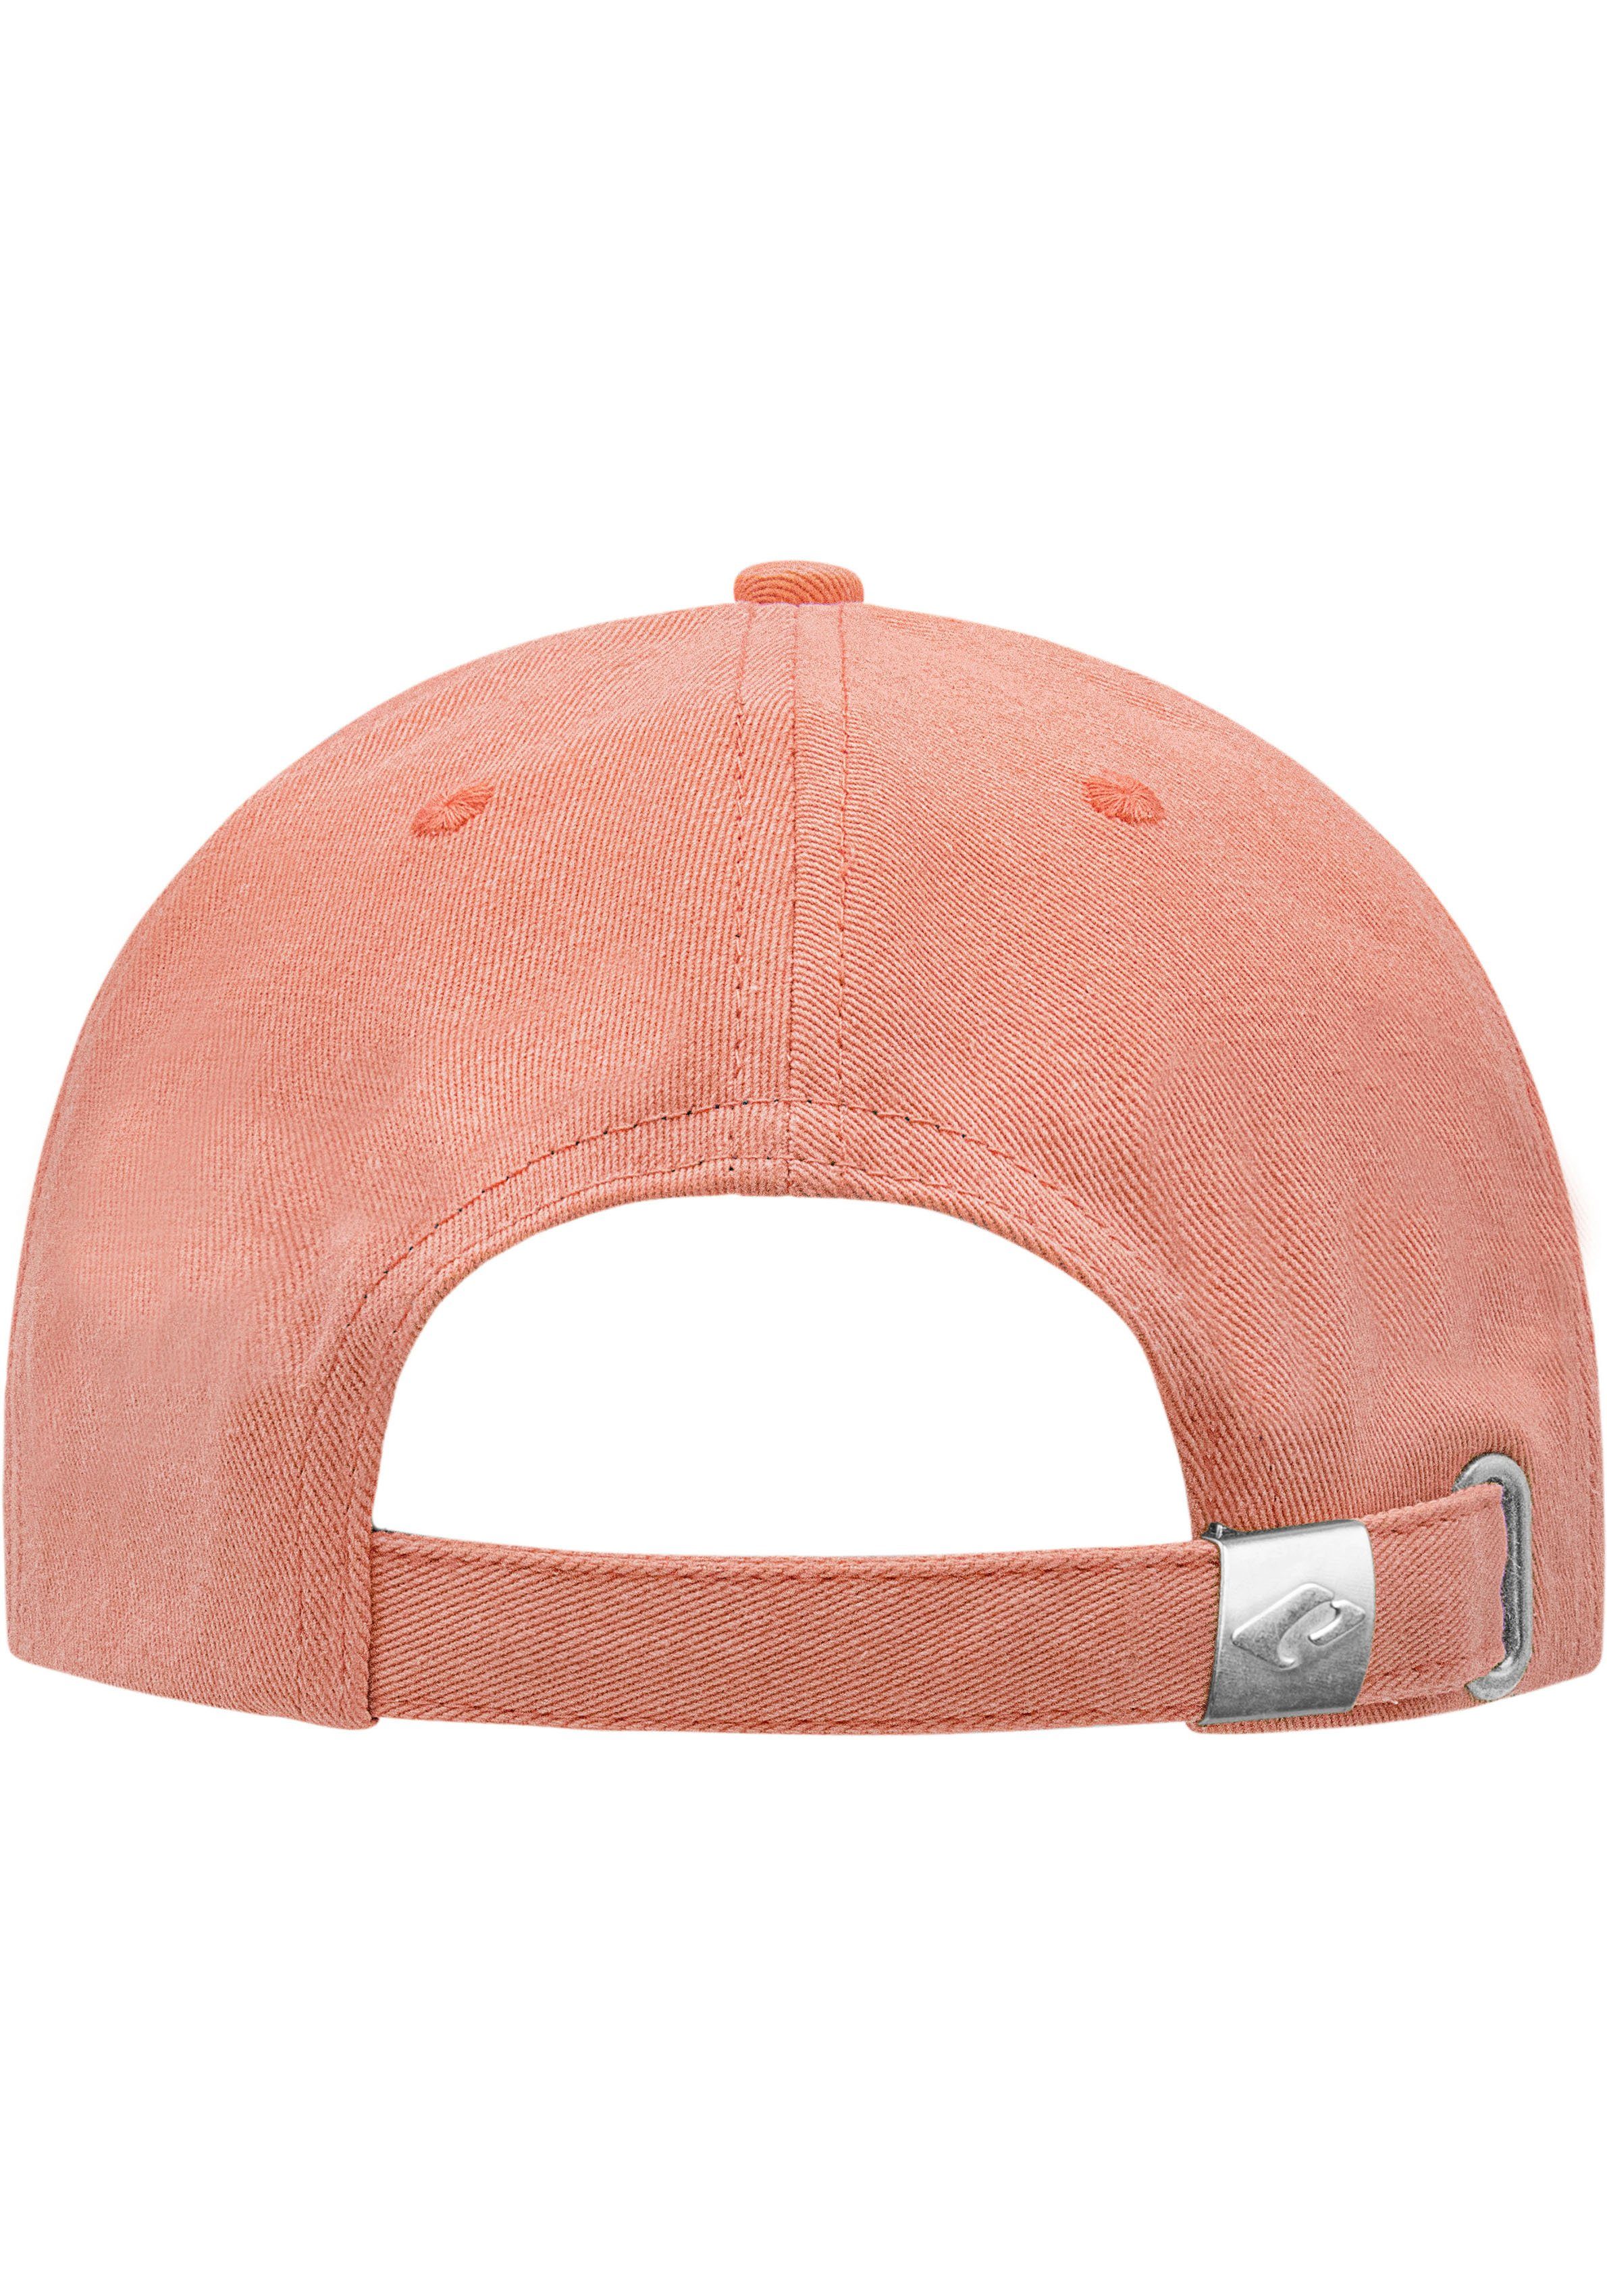 chillouts Baseball Cap Arklow Hat coral